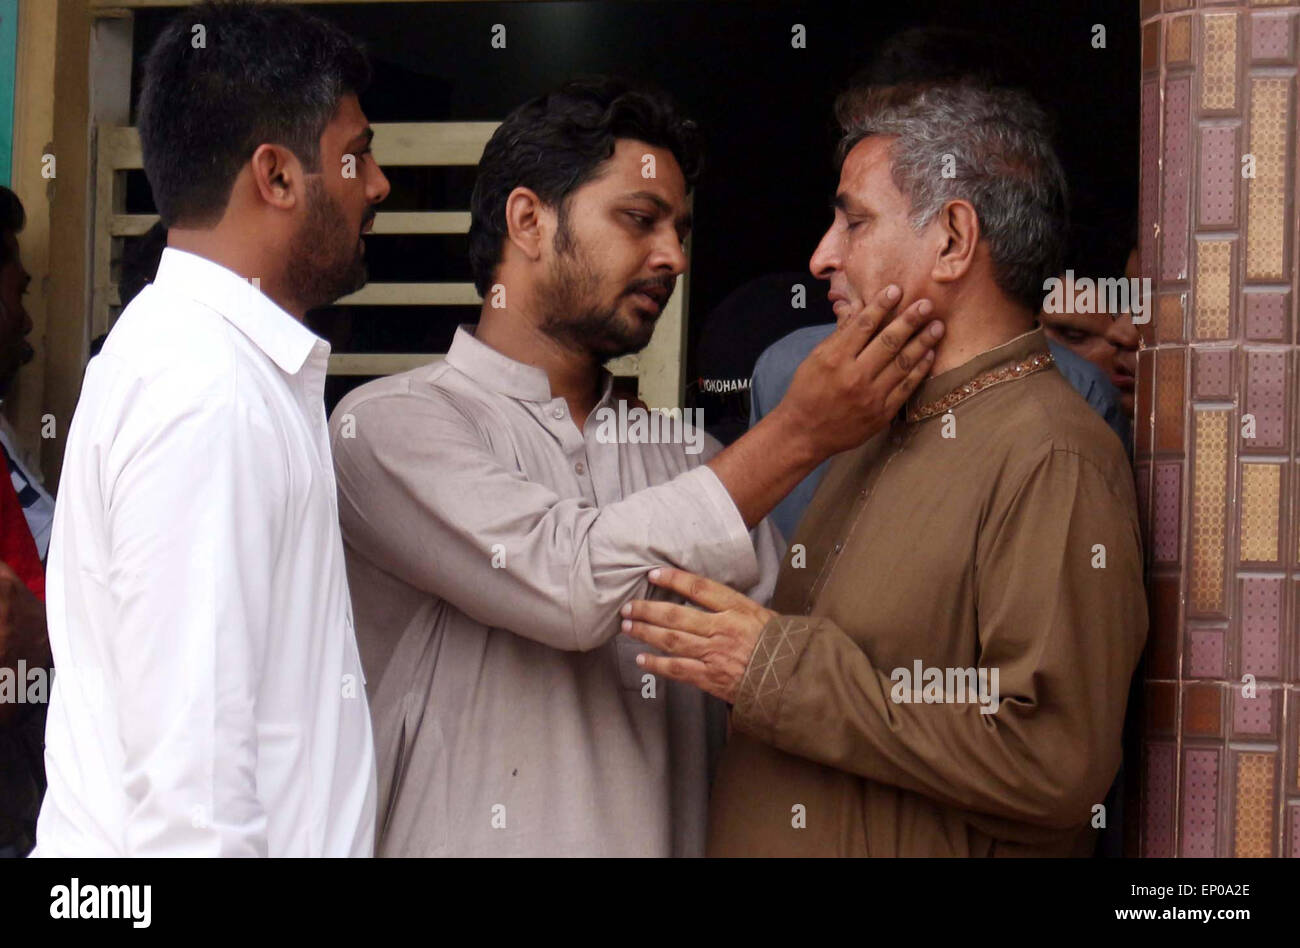 Relatives of Former Muttahida Qaumi Movement (MQM) activist Saulat Mirza react mourn on the shifting of his dead body, who was hanged at Mach prison on Tuesday in triple murder case was stated to be calm and composed at gallows, at Edhi cold storage in Karachi on Tuesday, May 12, 2015. Former Muttahida Qaumi Movement (MQM) activist Saulat Mirza was executed today morning at 4:30 AM, for the murder of former KESC managing director Shahid Hamid, his driver and guard in 1997. Stock Photo